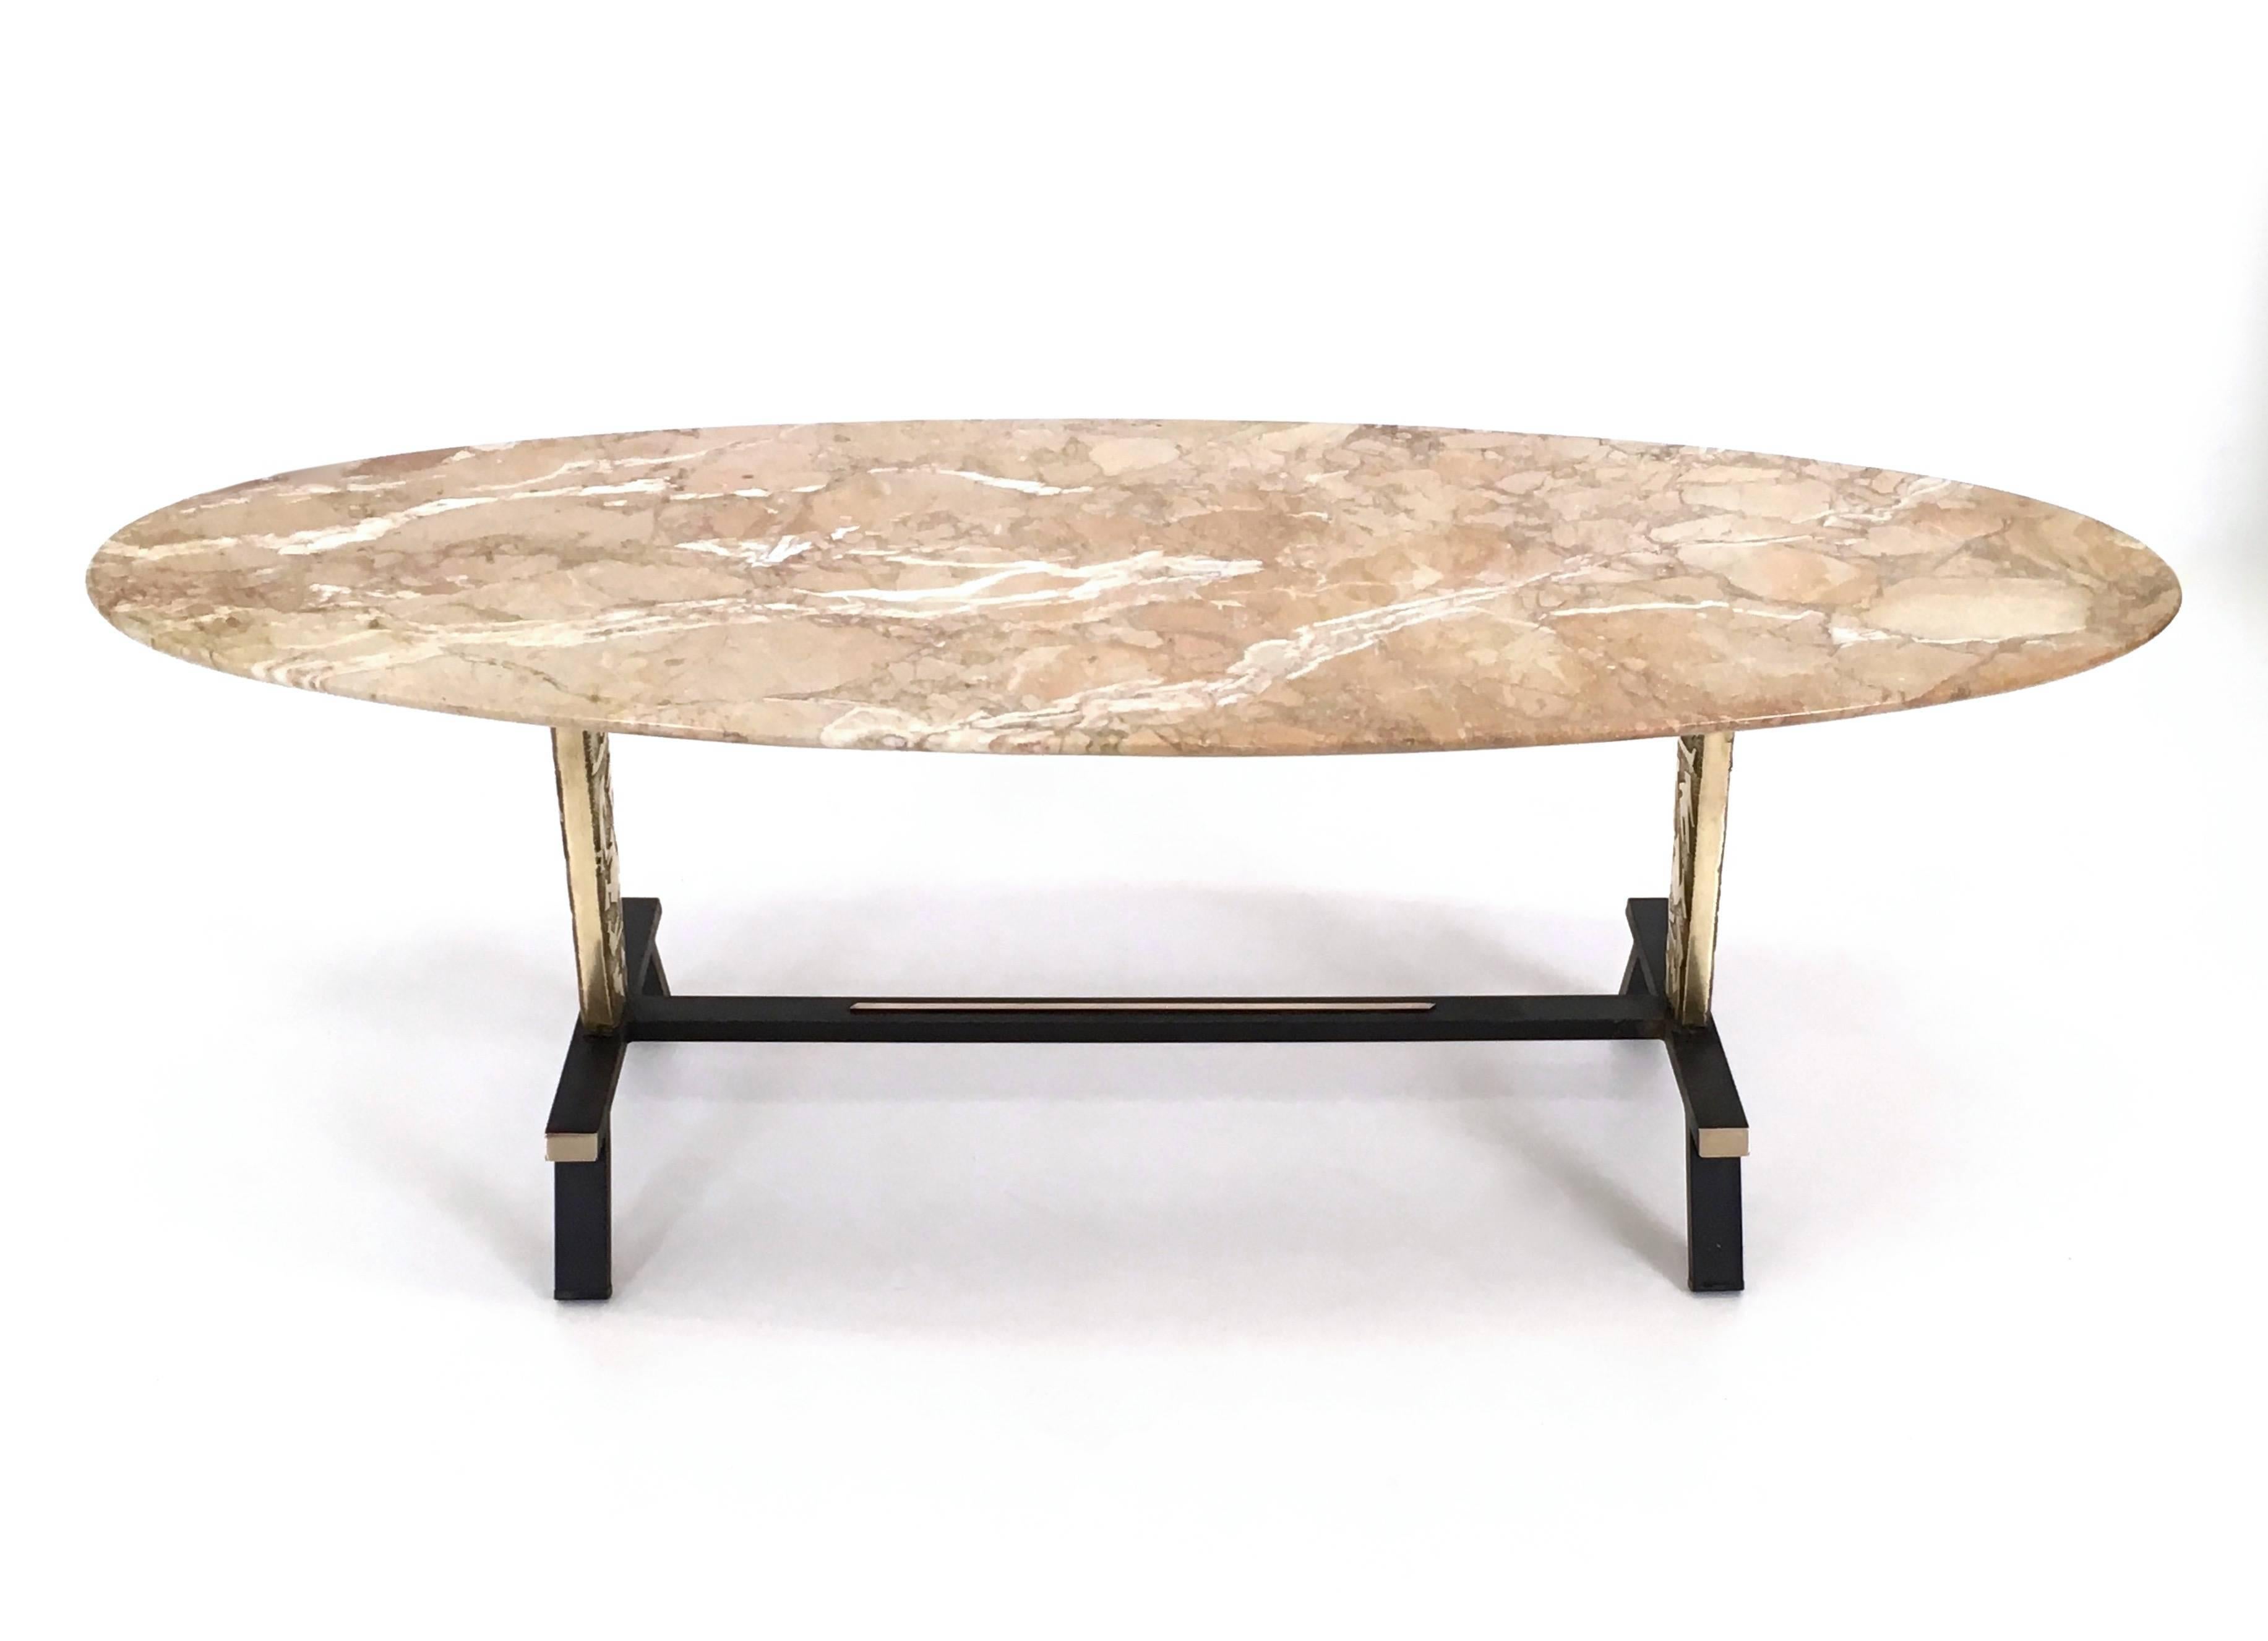 Mid-20th Century Coffee Table with Cast Brass Legs and an Oval Pink Marble Top, Italy, 1950s